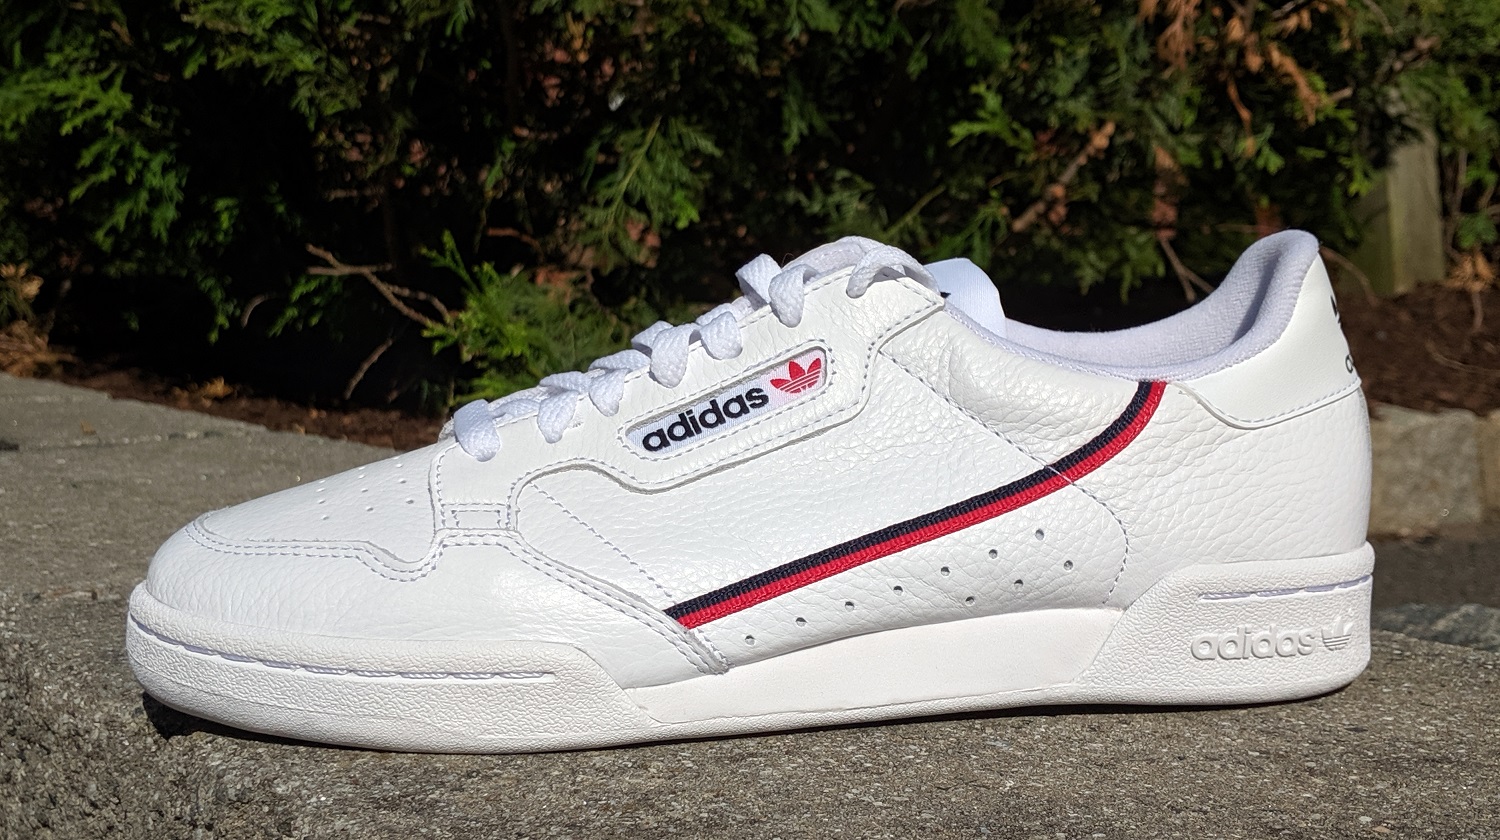 In Review: The adidas Continental 80